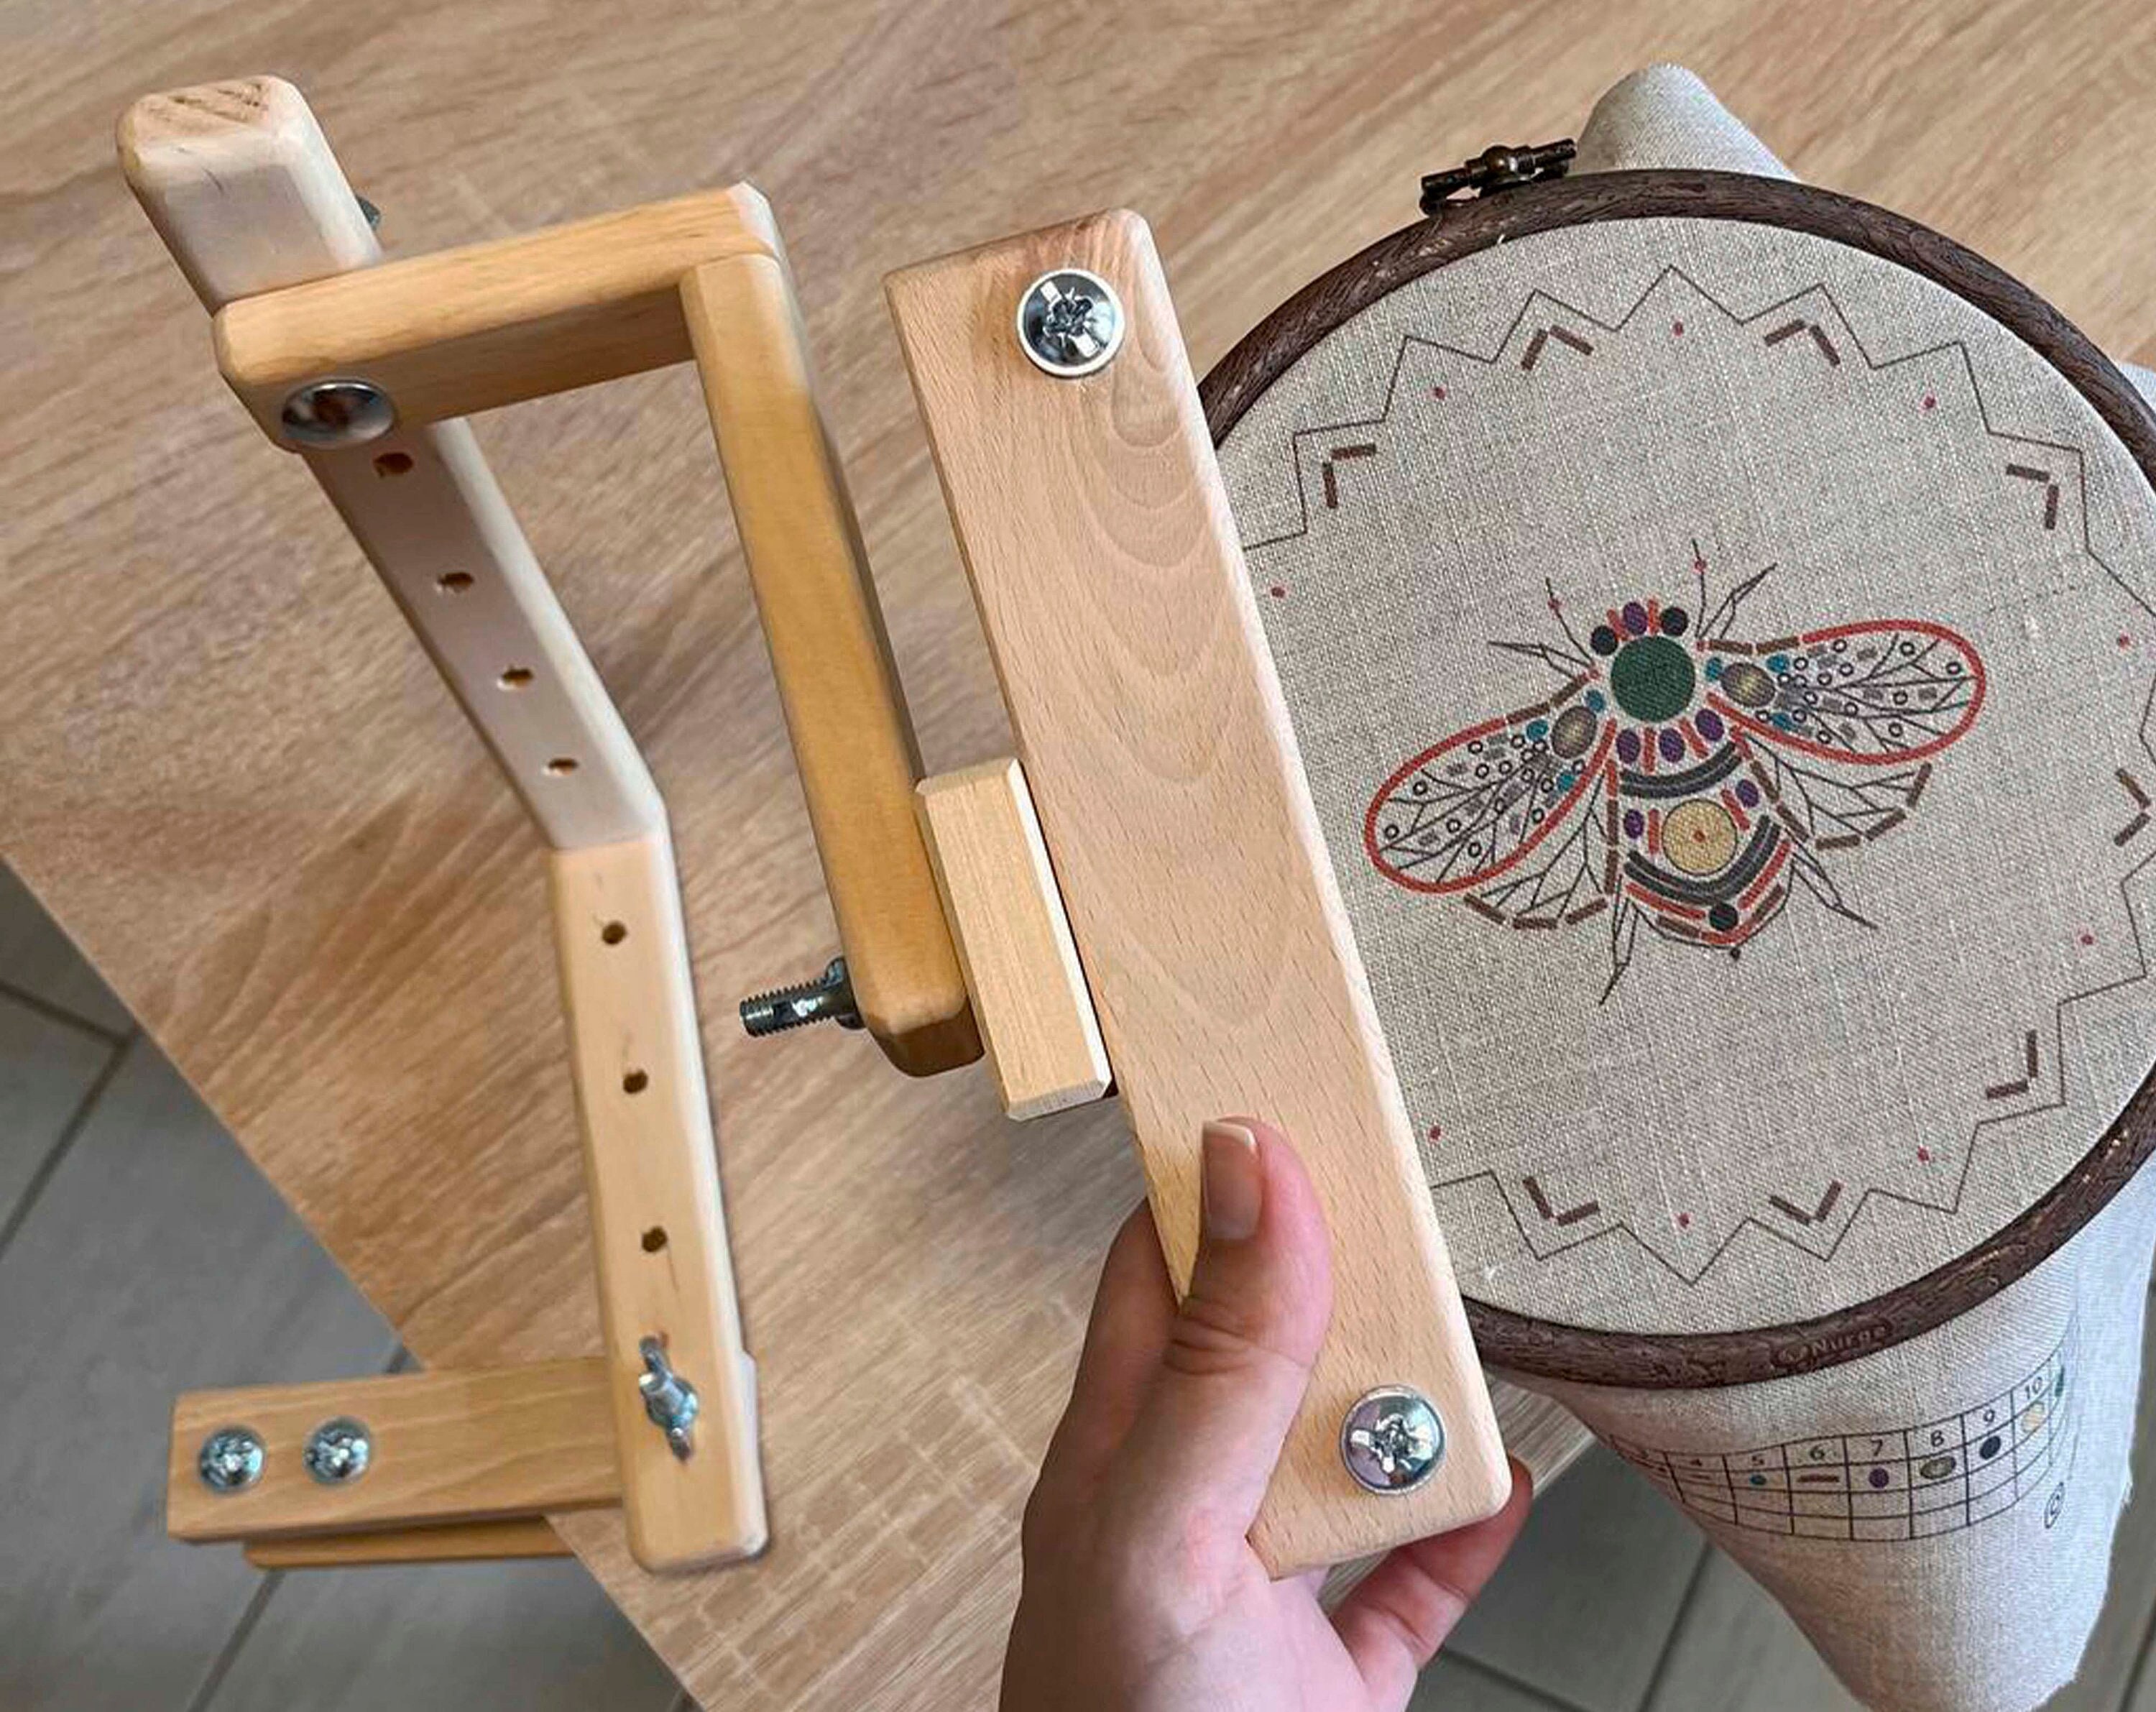 Embroidery Stand for Hoop, Wooden Table Frame Hoop Holder With